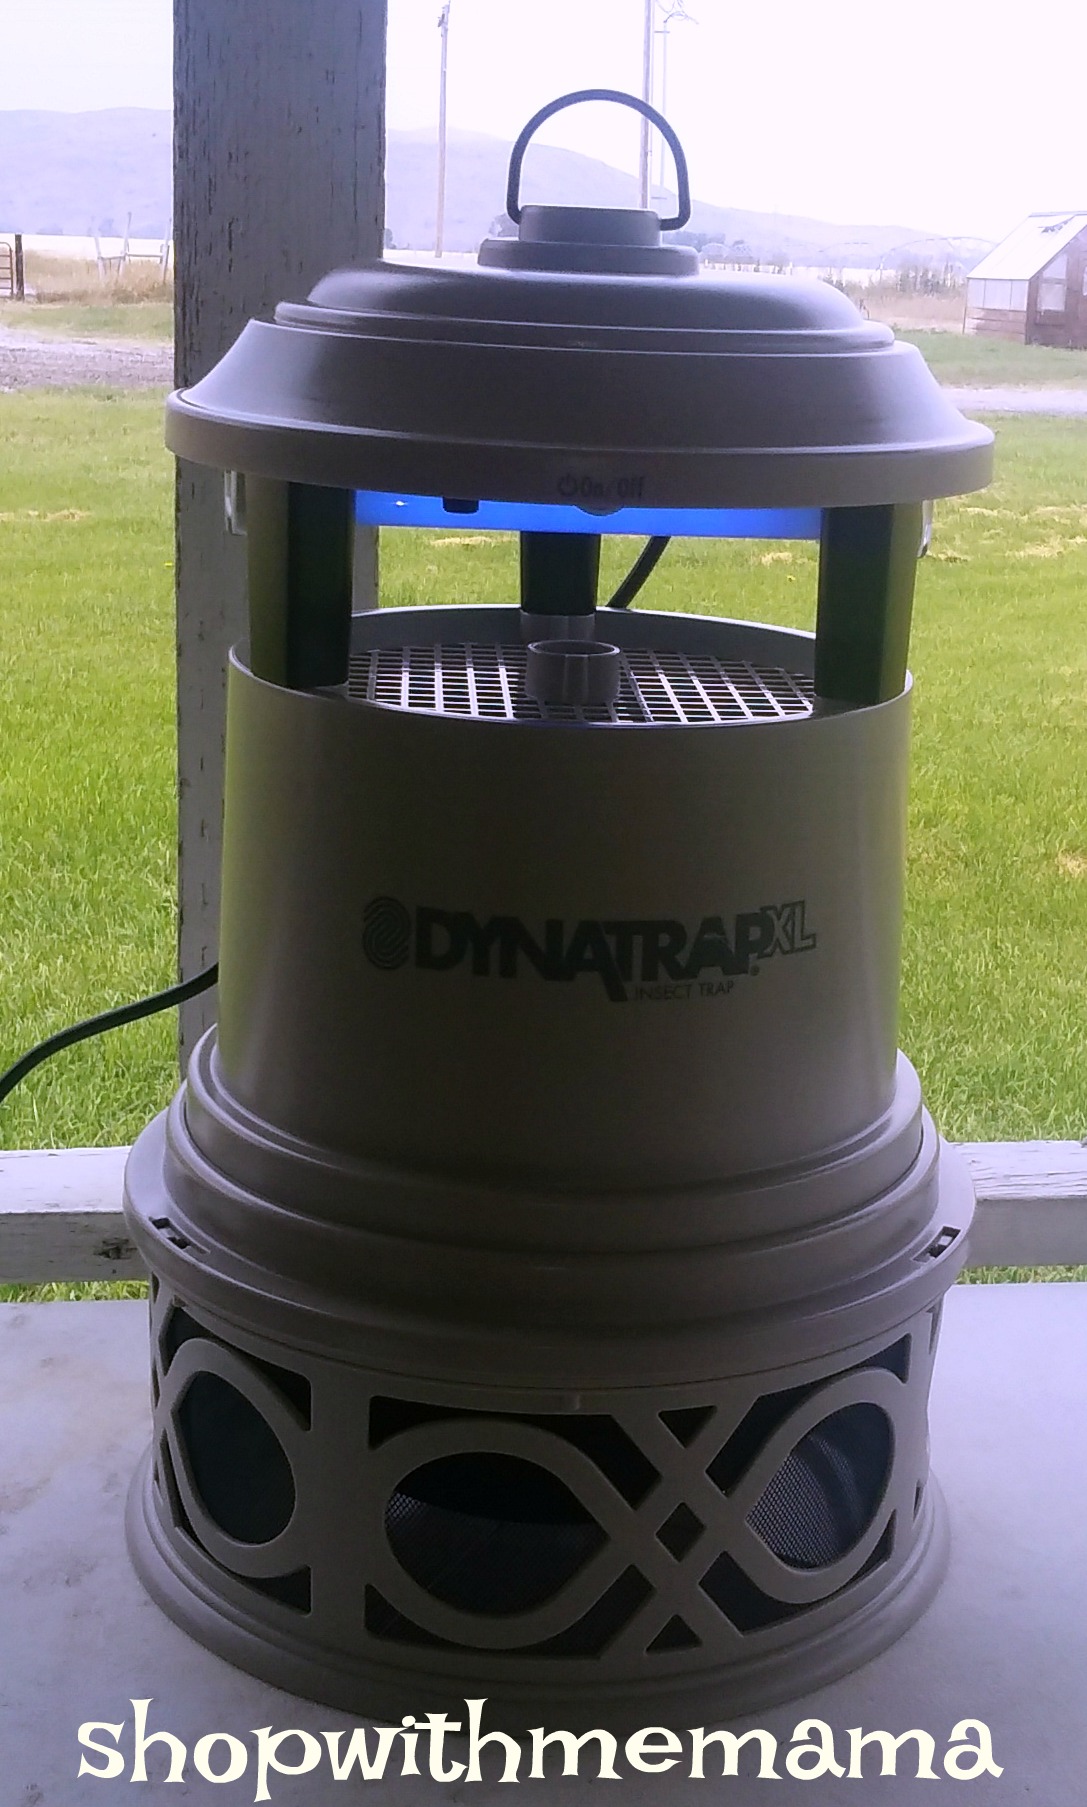 Enjoy a Bug-Free Outdoors with The DynaTrap Insect Trap